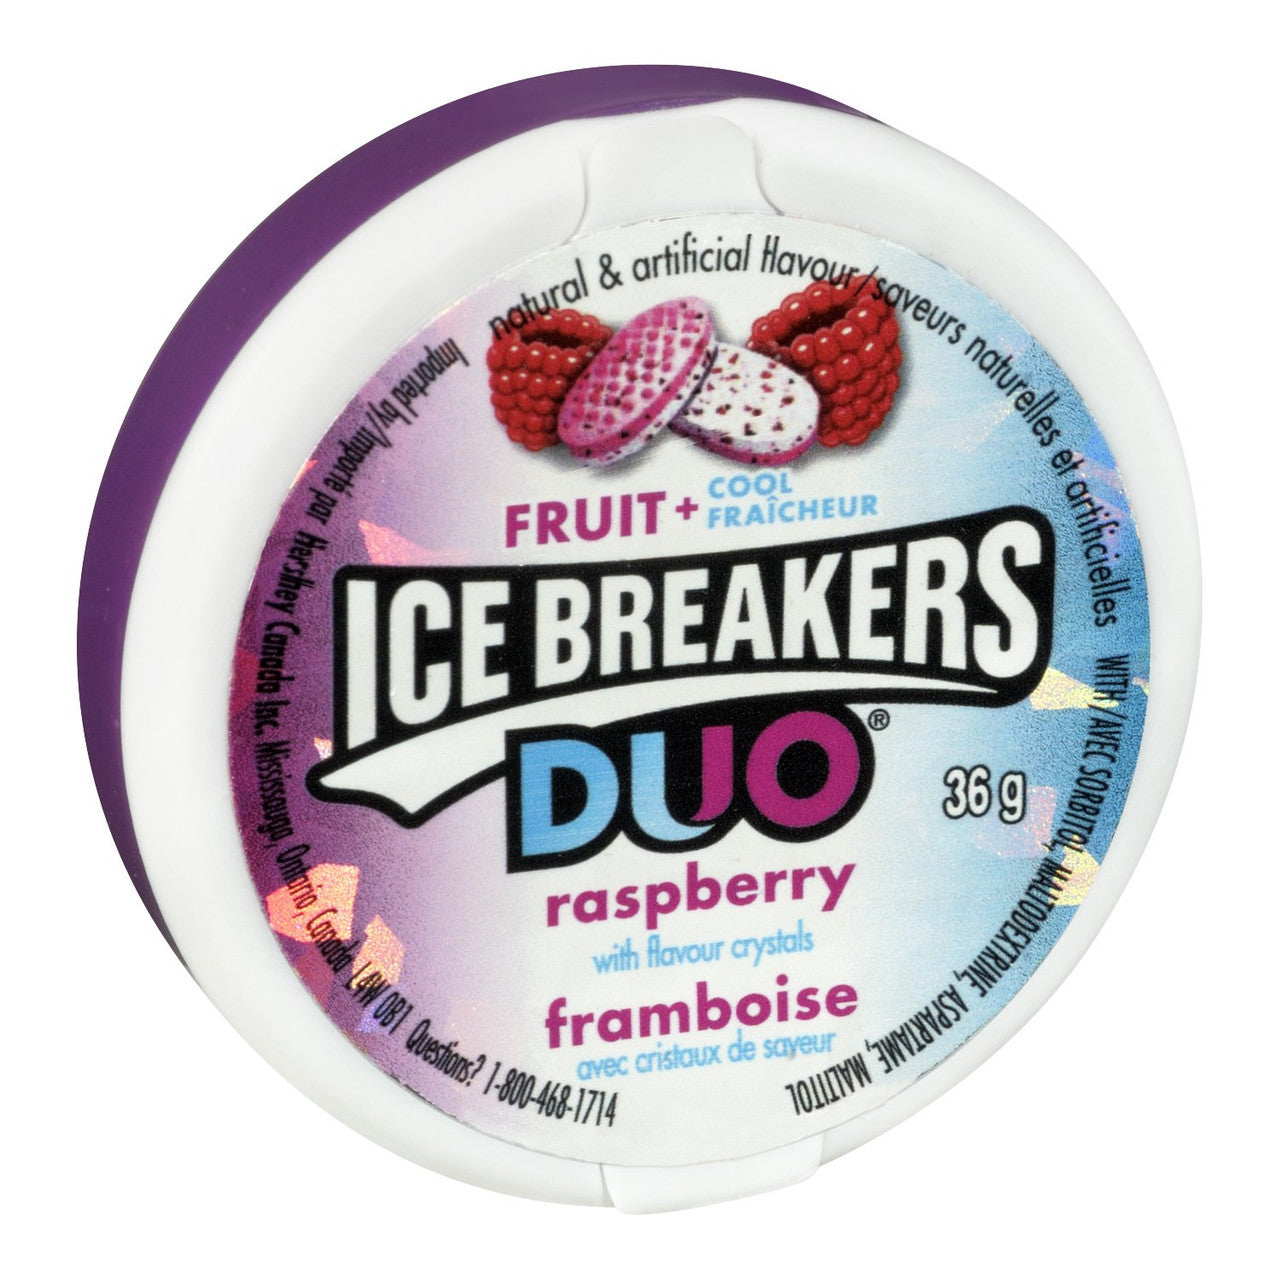 Ice Breakers Sours Mixed Berry Sugar Free Mint Candies - 1.5oz